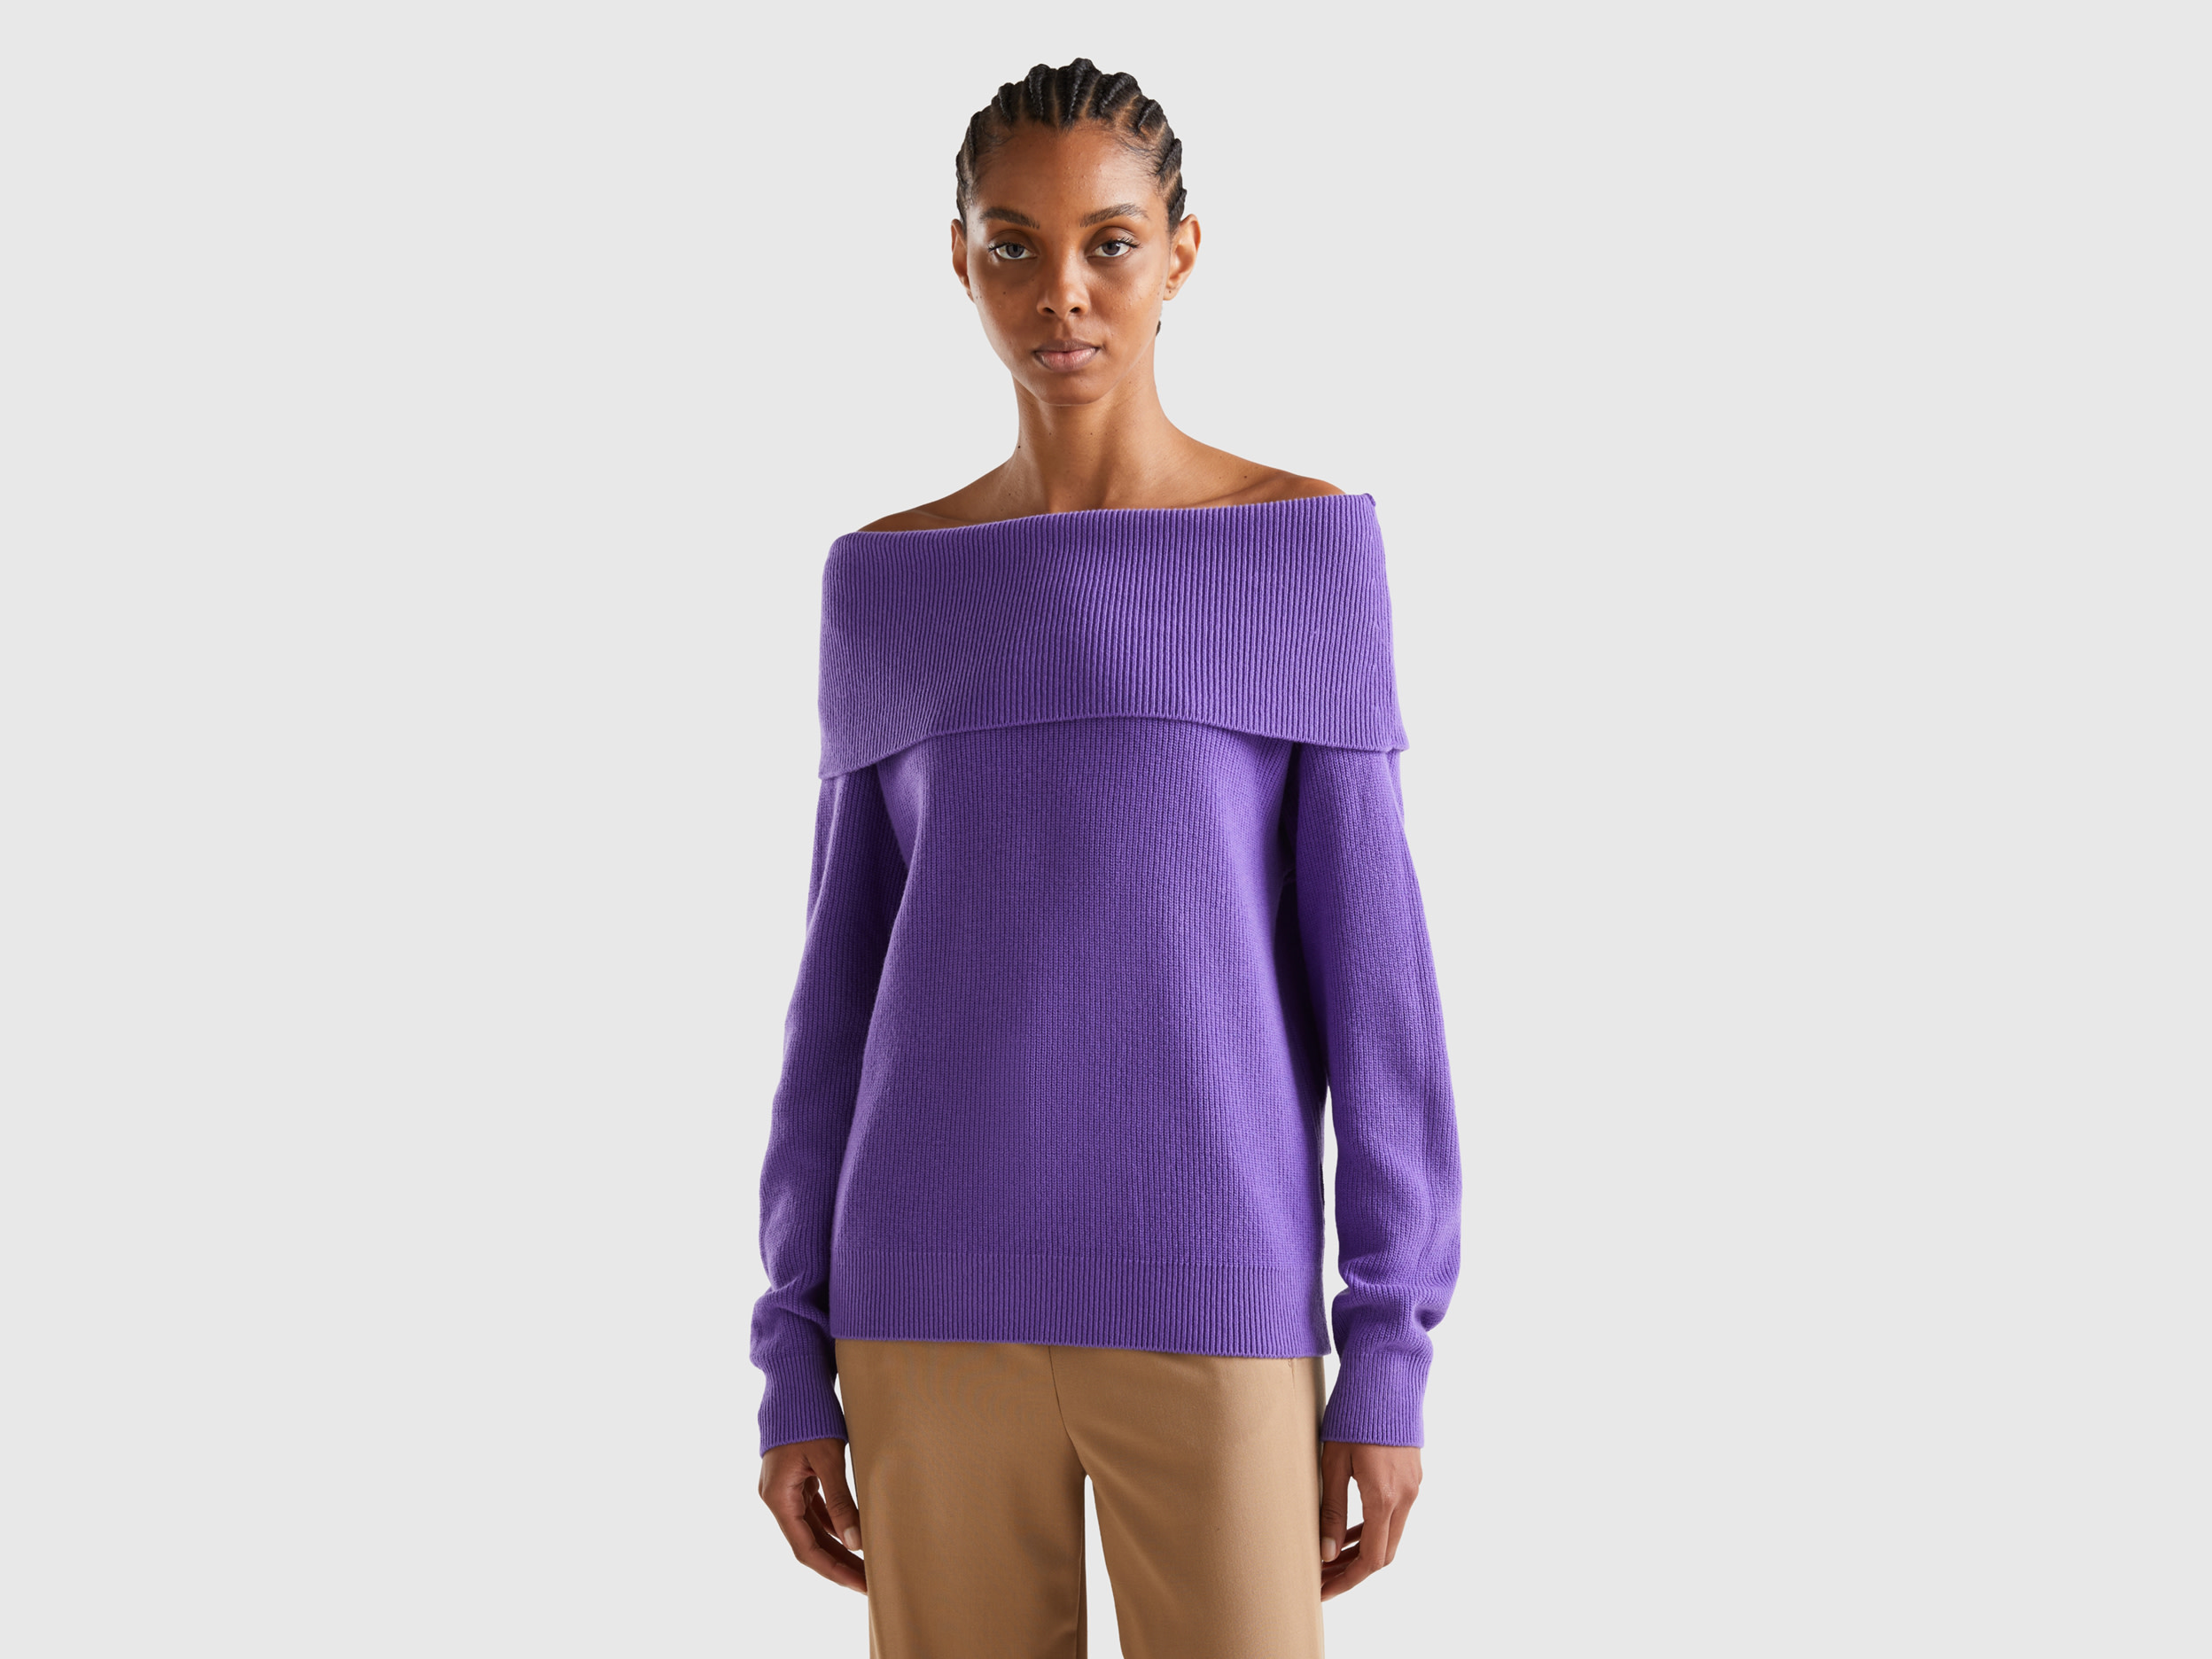 Benetton, Sweater With Bare Shoulders, size M, Violet, Women